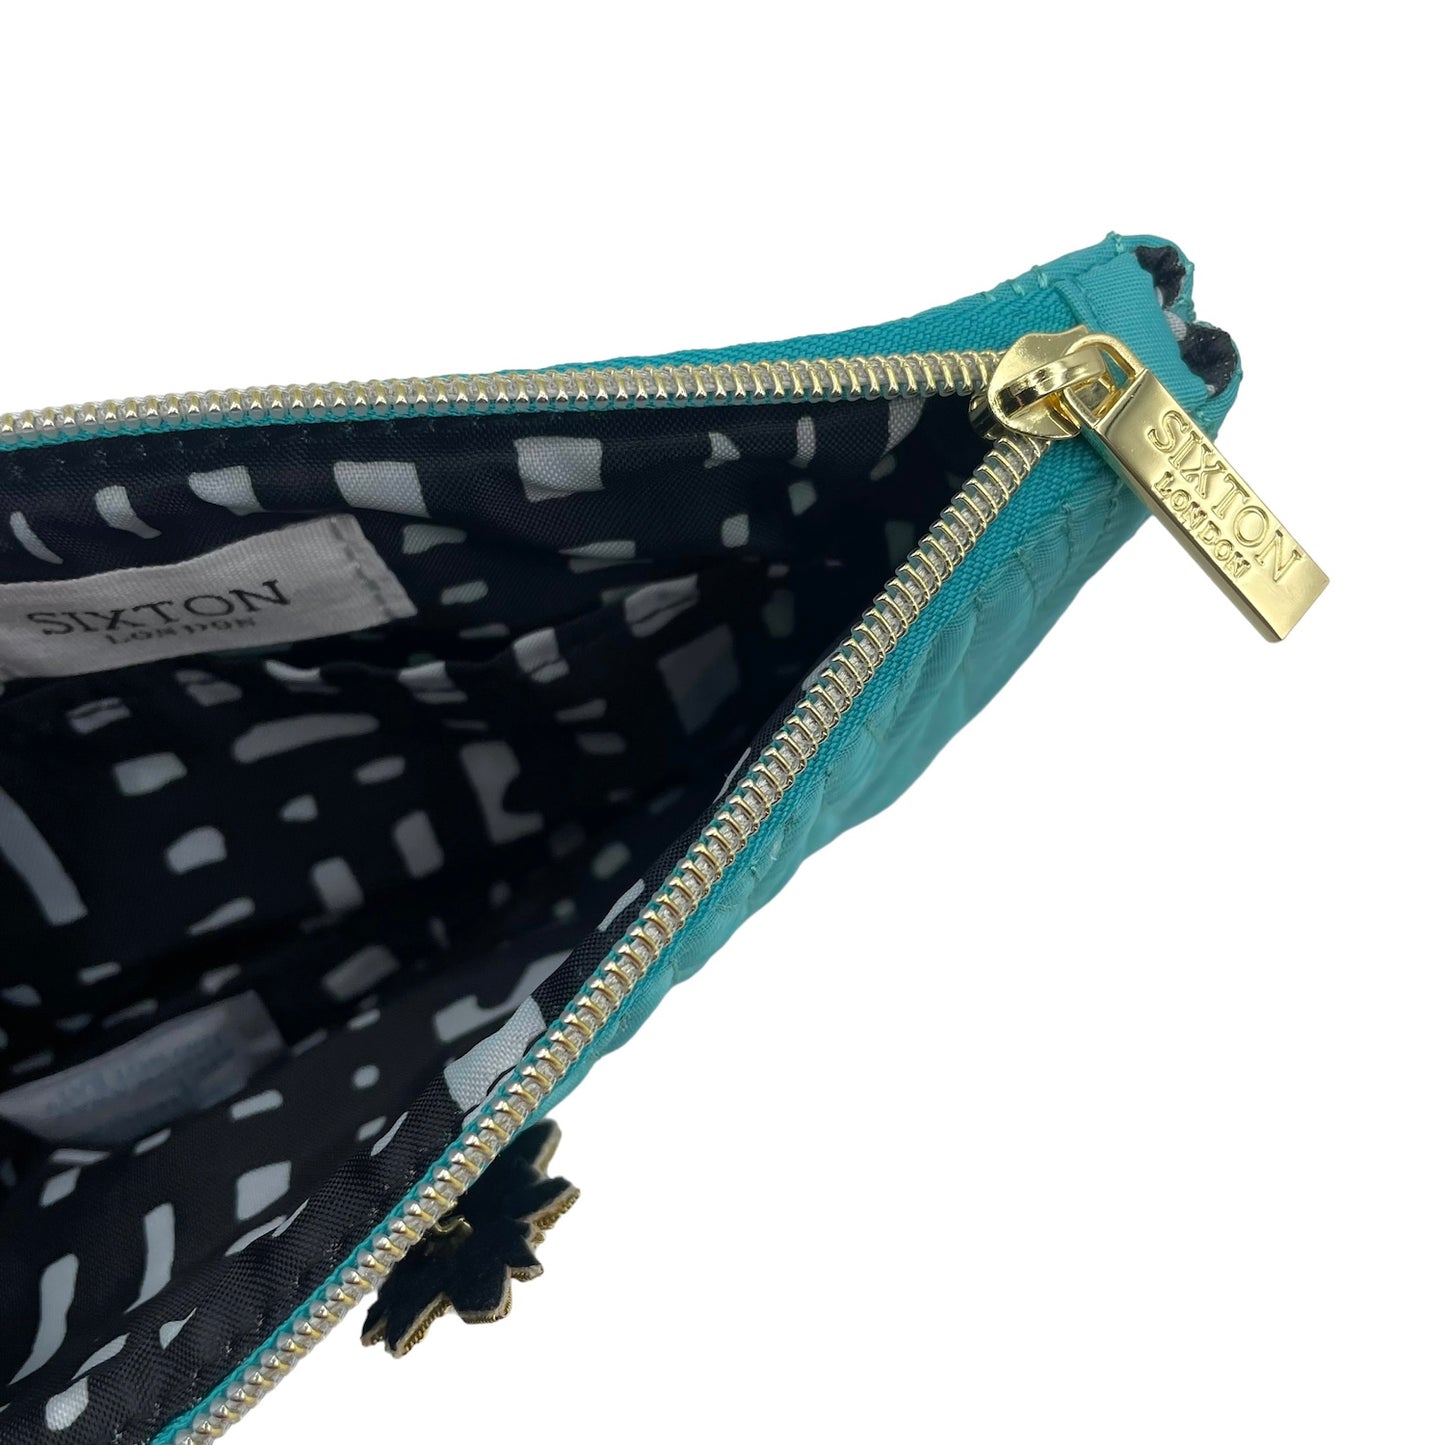 Turquoise Tribeca make up bag with a pineapple pin